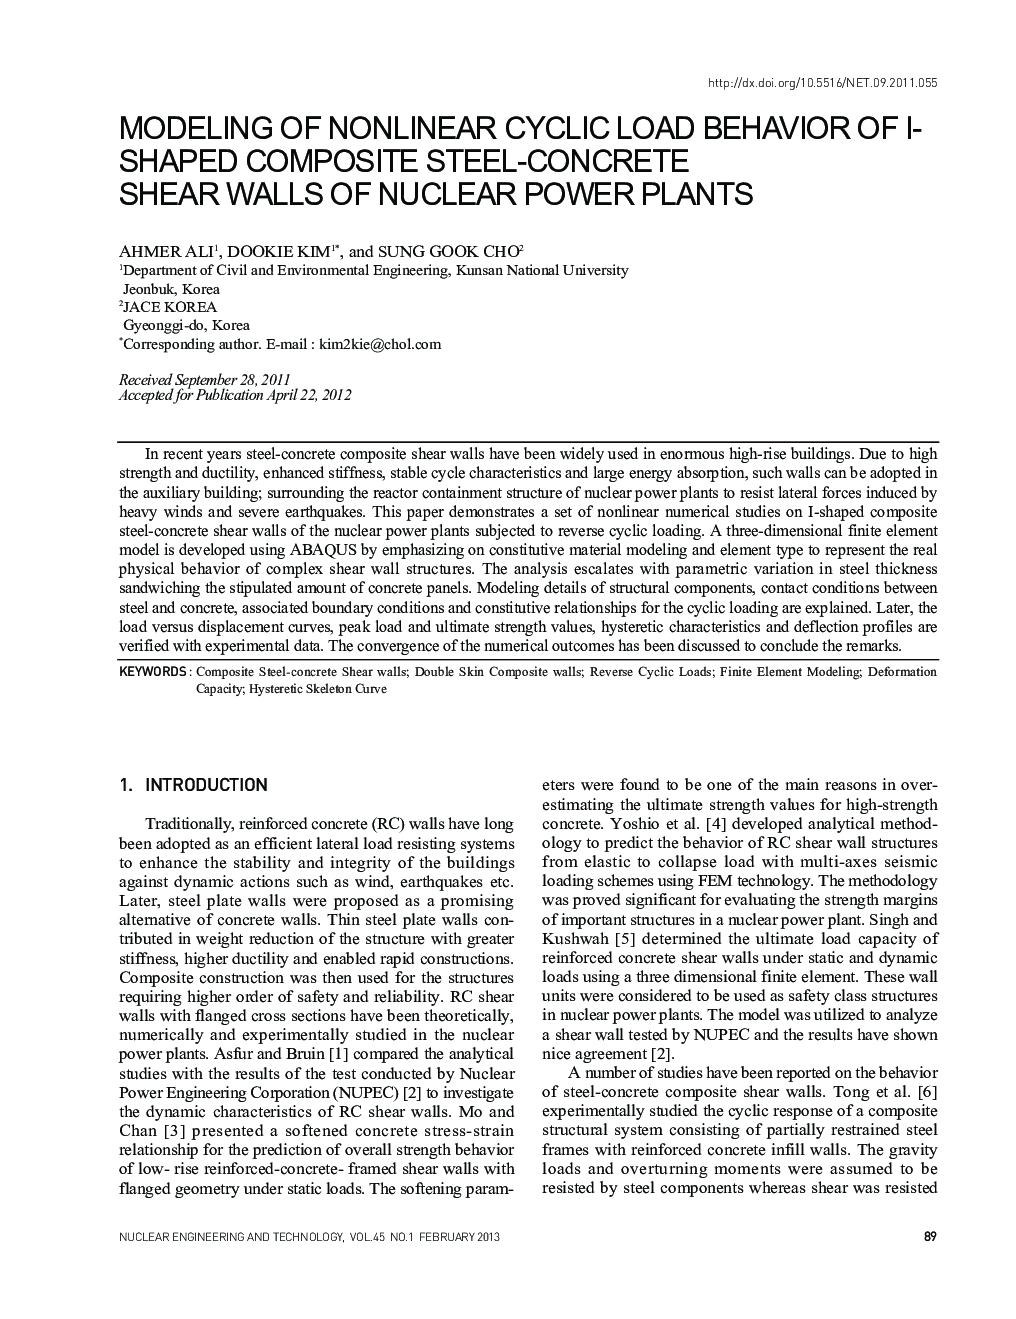 MODELING OF NONLINEAR CYCLIC LOAD BEHAVIOR OF I-SHAPED COMPOSITE STEEL-CONCRETE SHEAR WALLS OF NUCLEAR POWER PLANTS